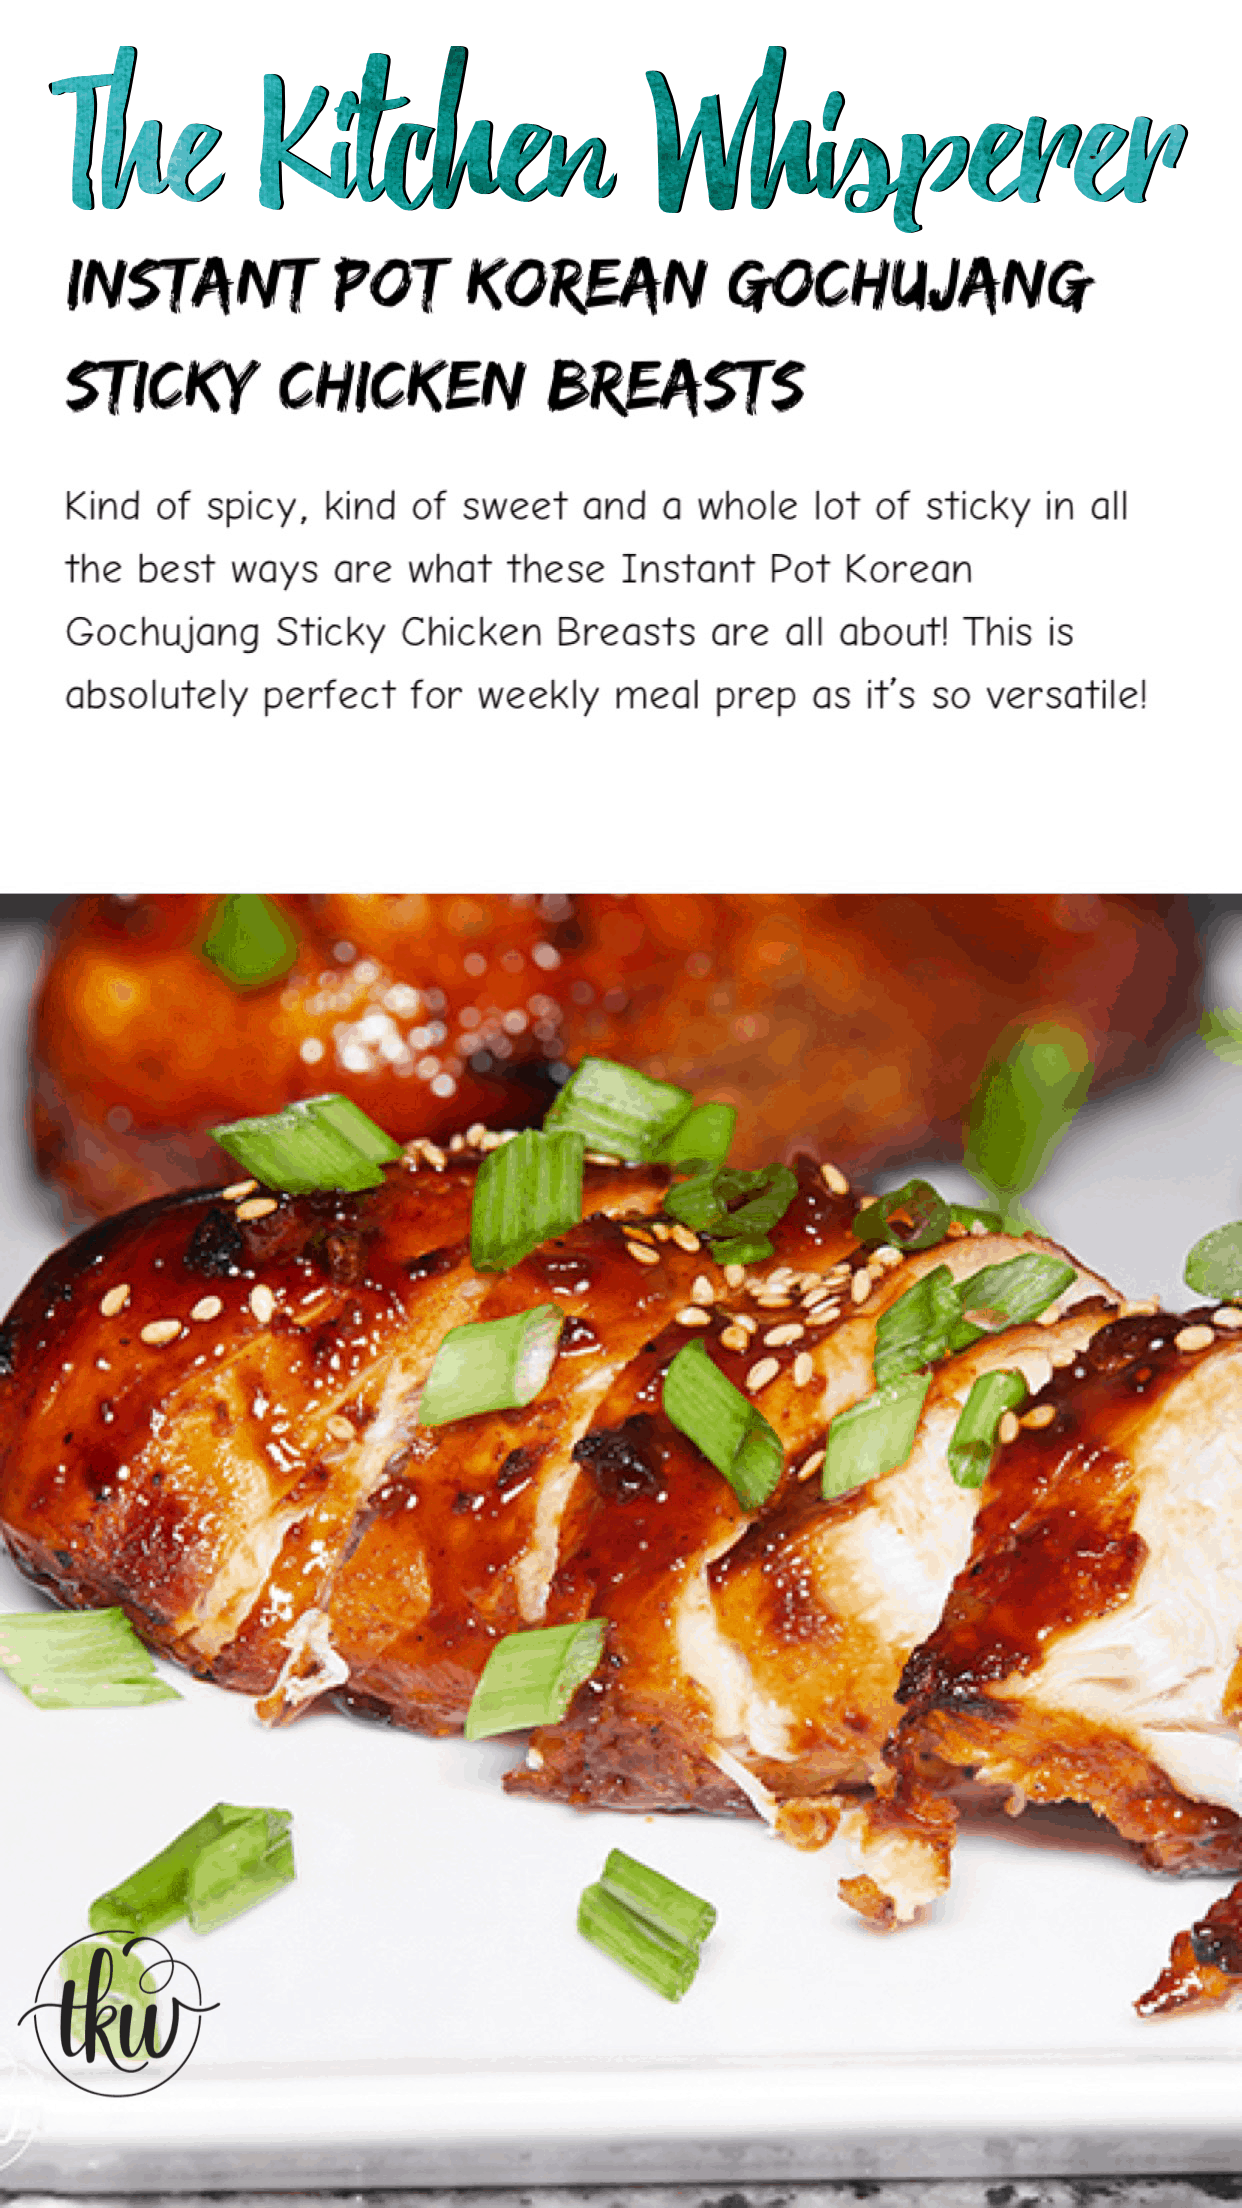 Pin to save this Instant Pot Korean Gochujang Sticky Chicken Breast Recipe